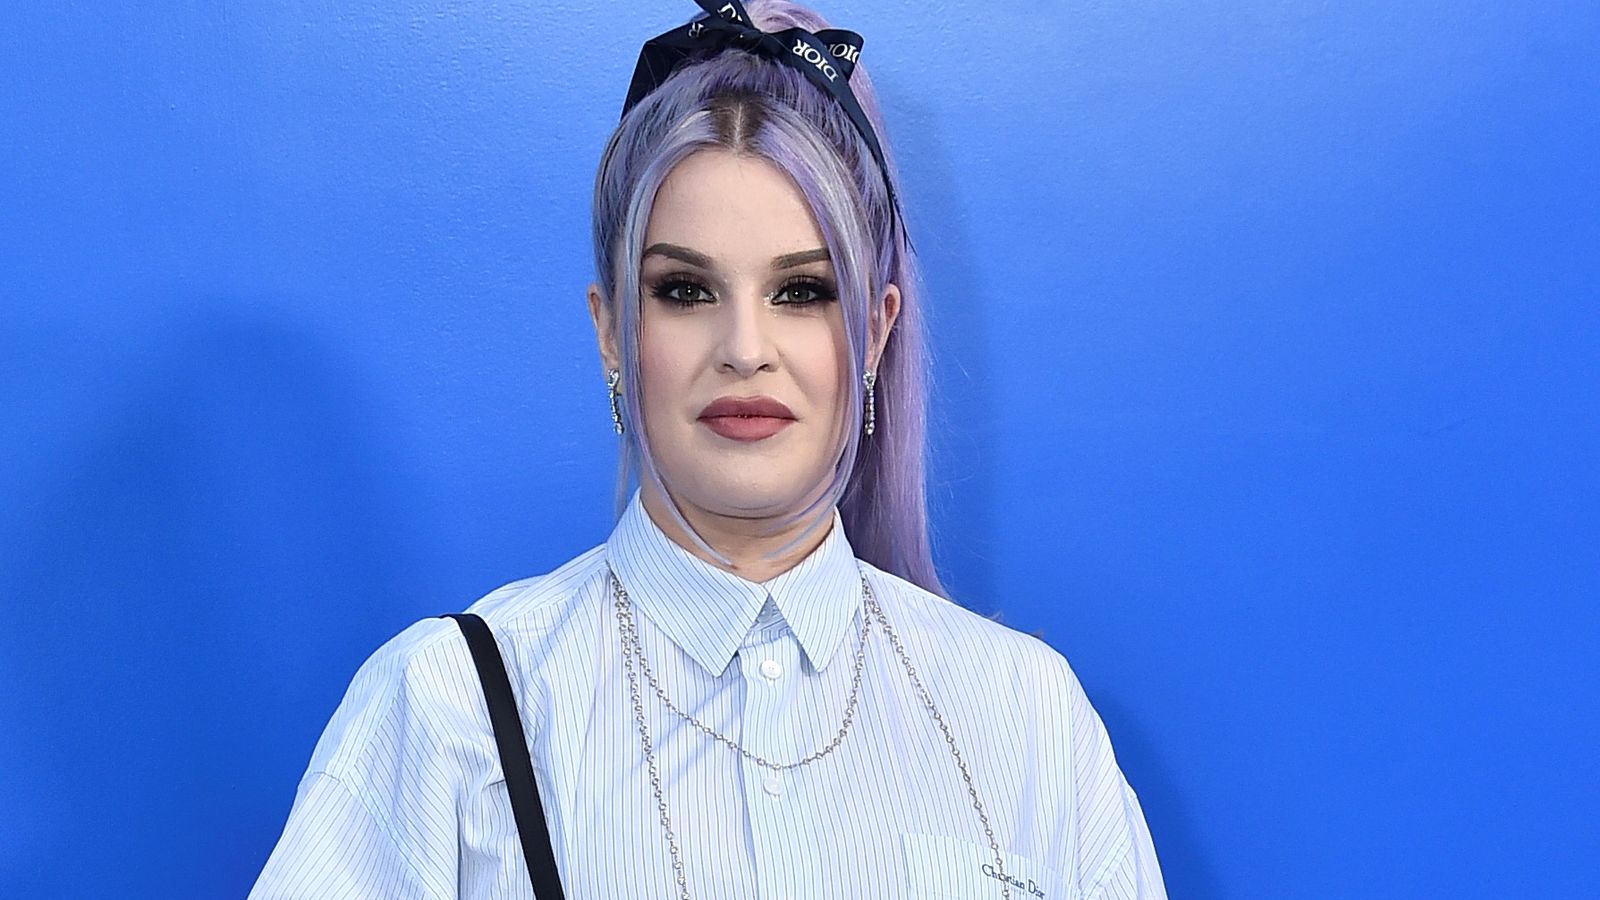 Kelly Osbourne says 'it's no one's place but mine' after mum Sharon